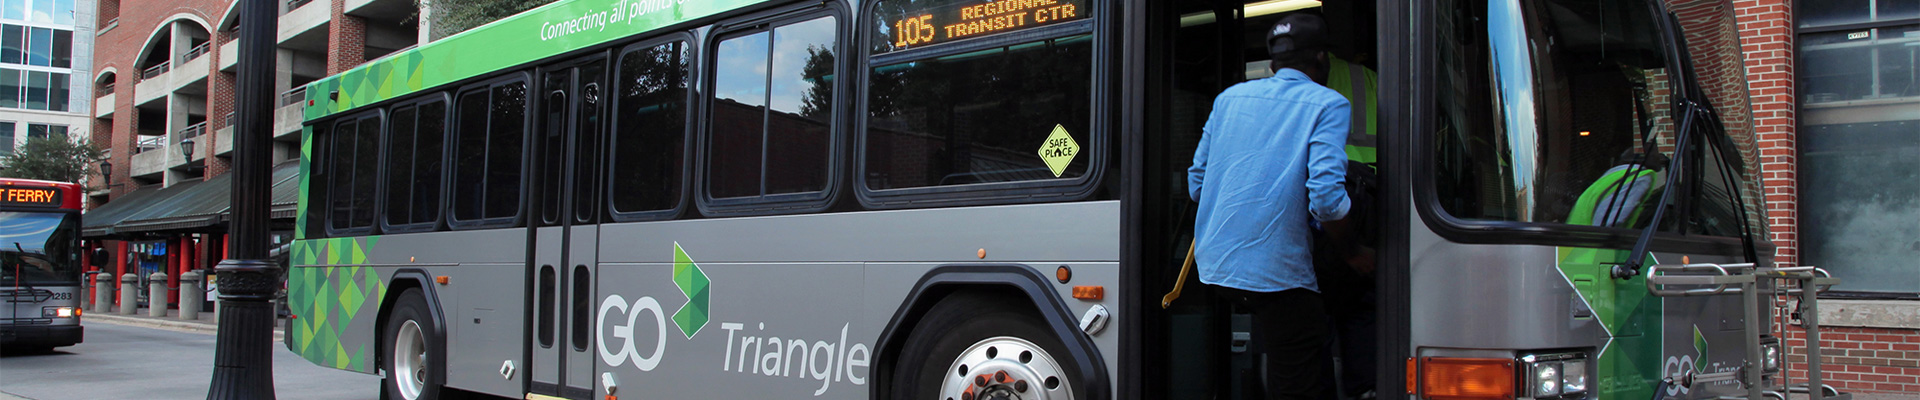 Man boards GoTriangle bus parked in Moore Square